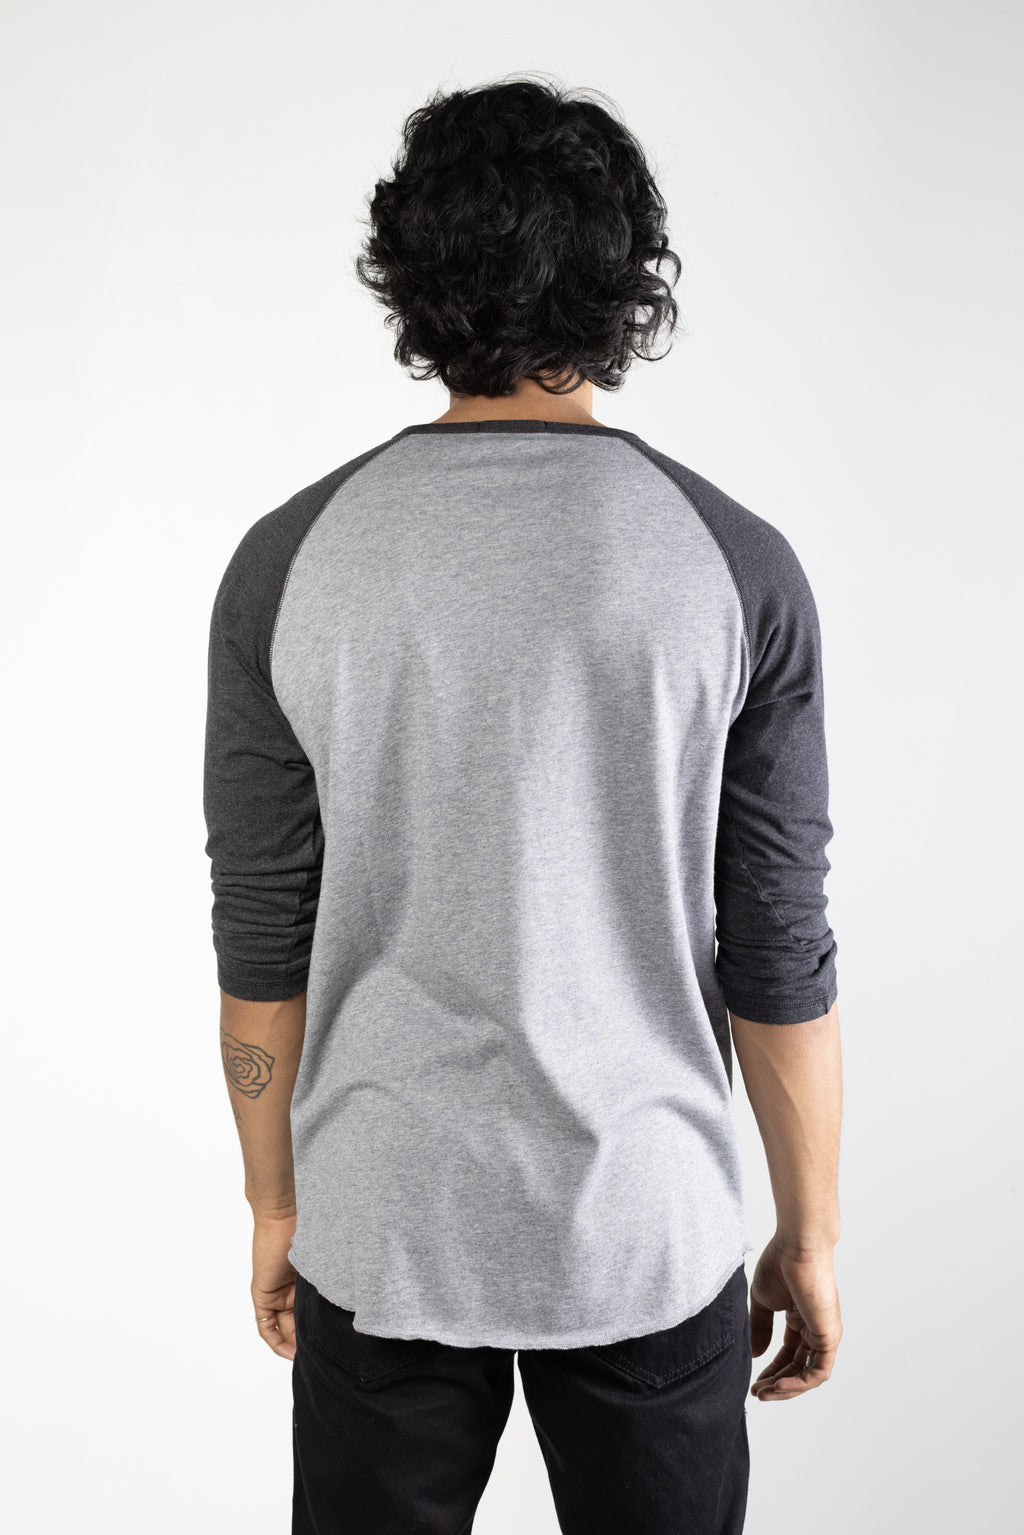 NS2122-9 Tri-blend 3/4 henley in Grey with Charcoal sleeves 04